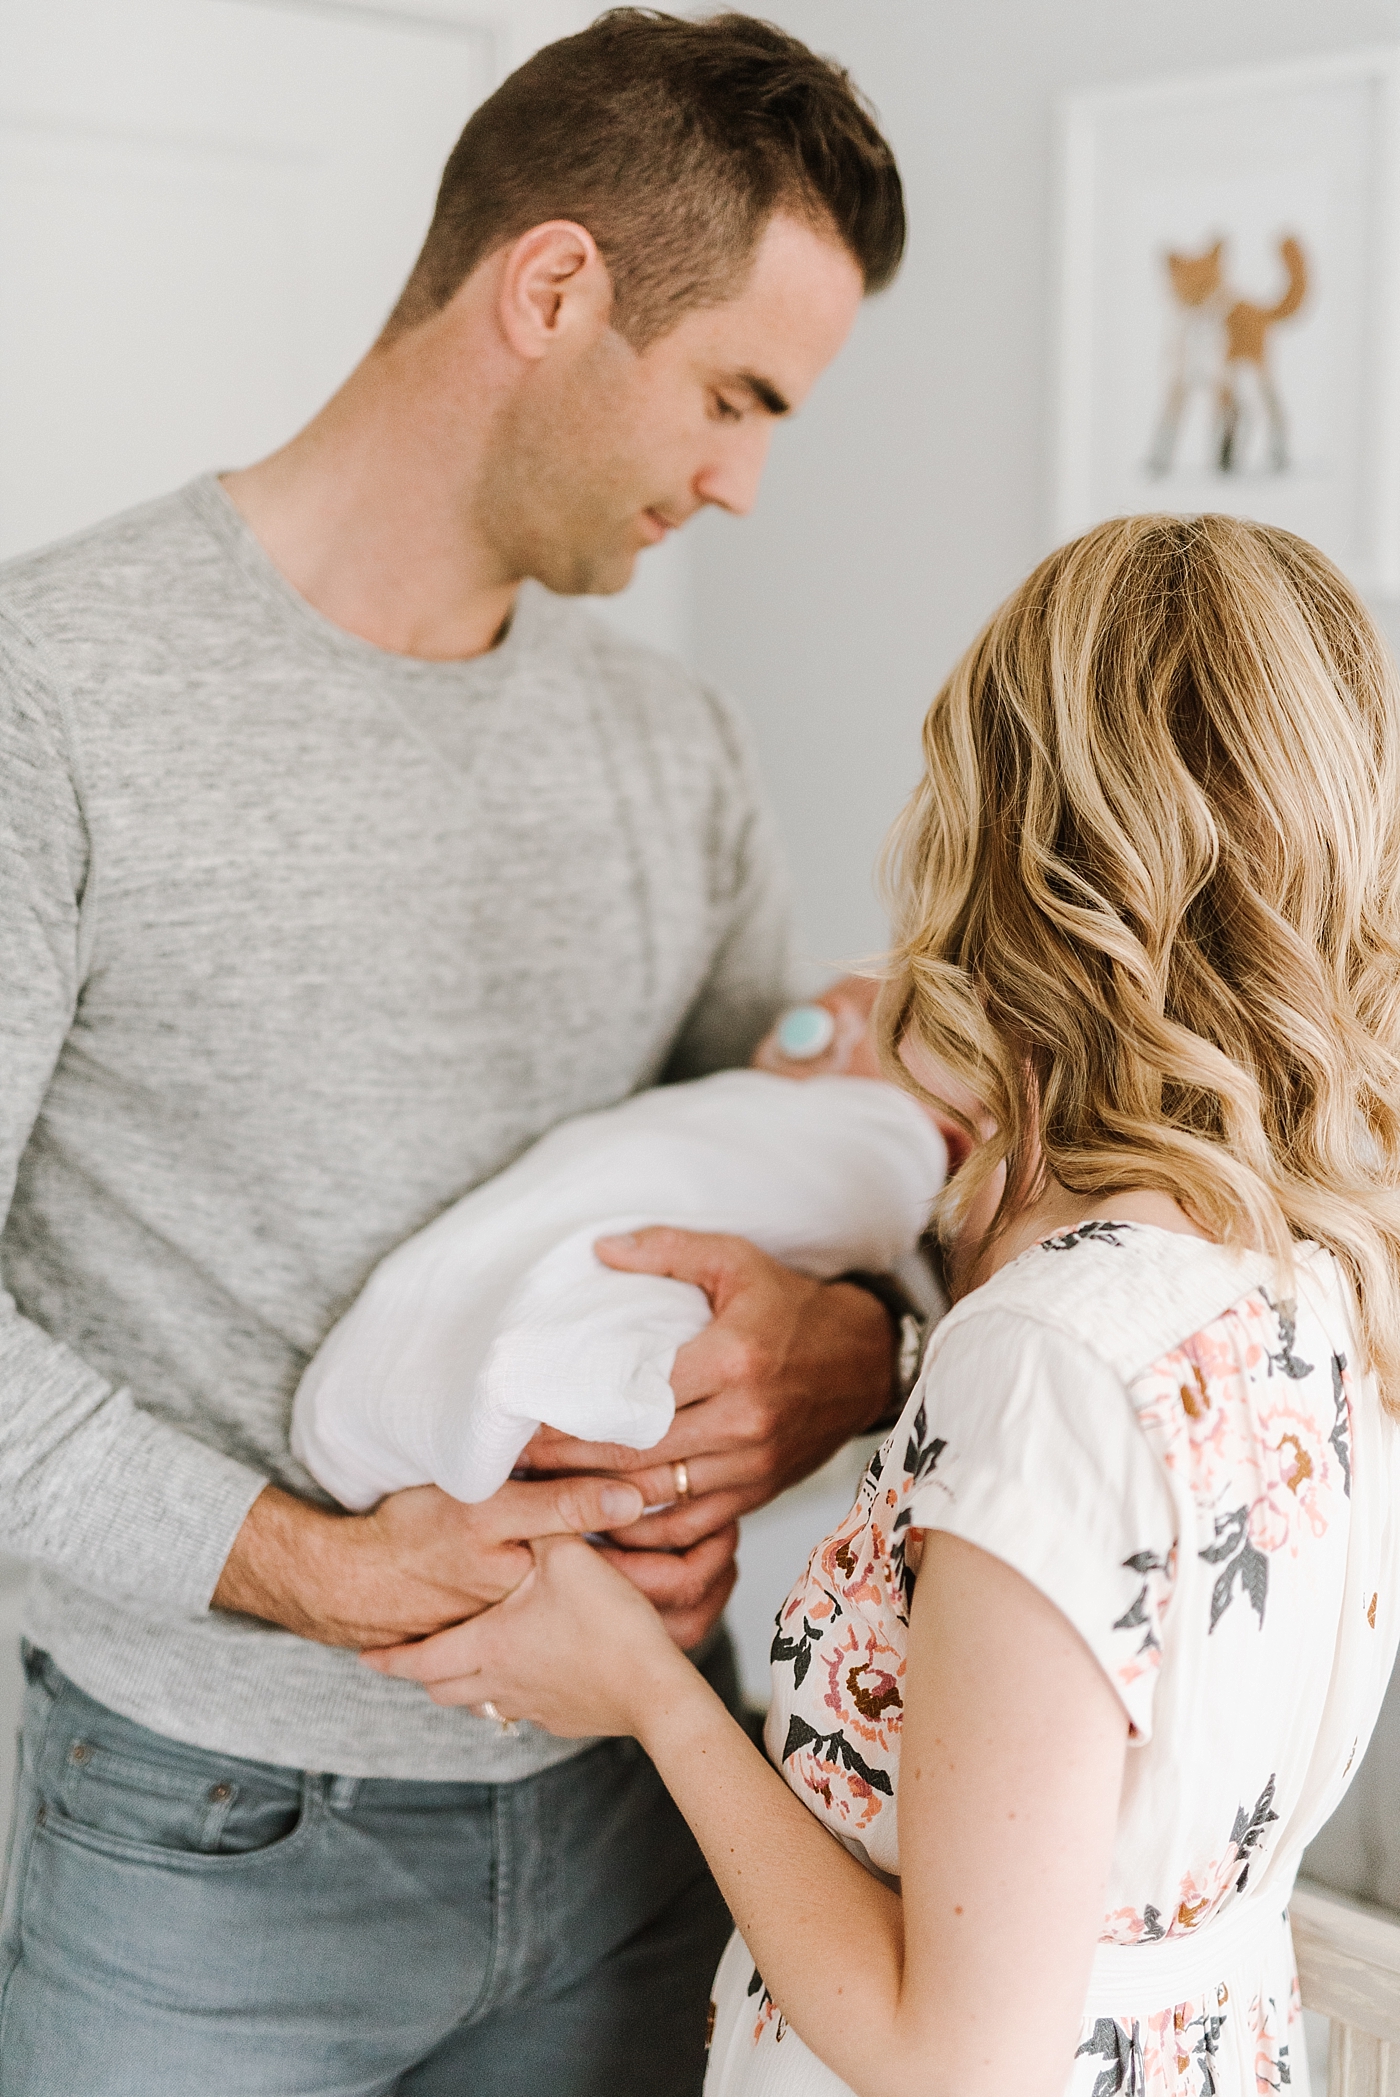 Sweet In Home Lifestyle Newborn Session by Boston Photographer Annmarie Swift